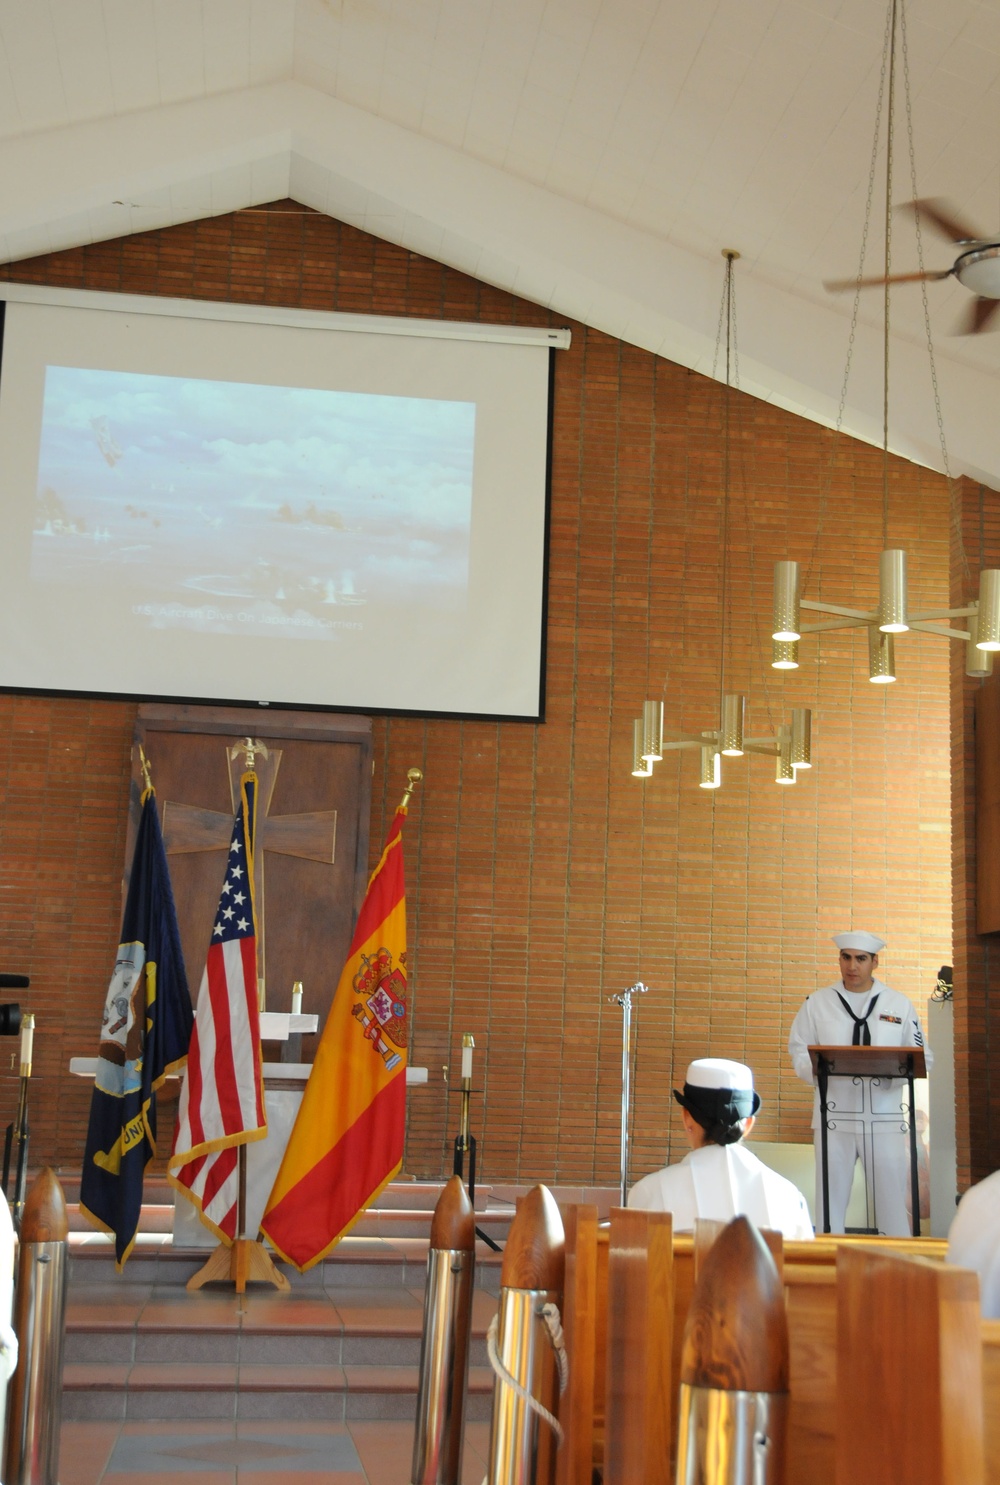 73rd Anniversary of the Battle of Midway commemoration ceremony